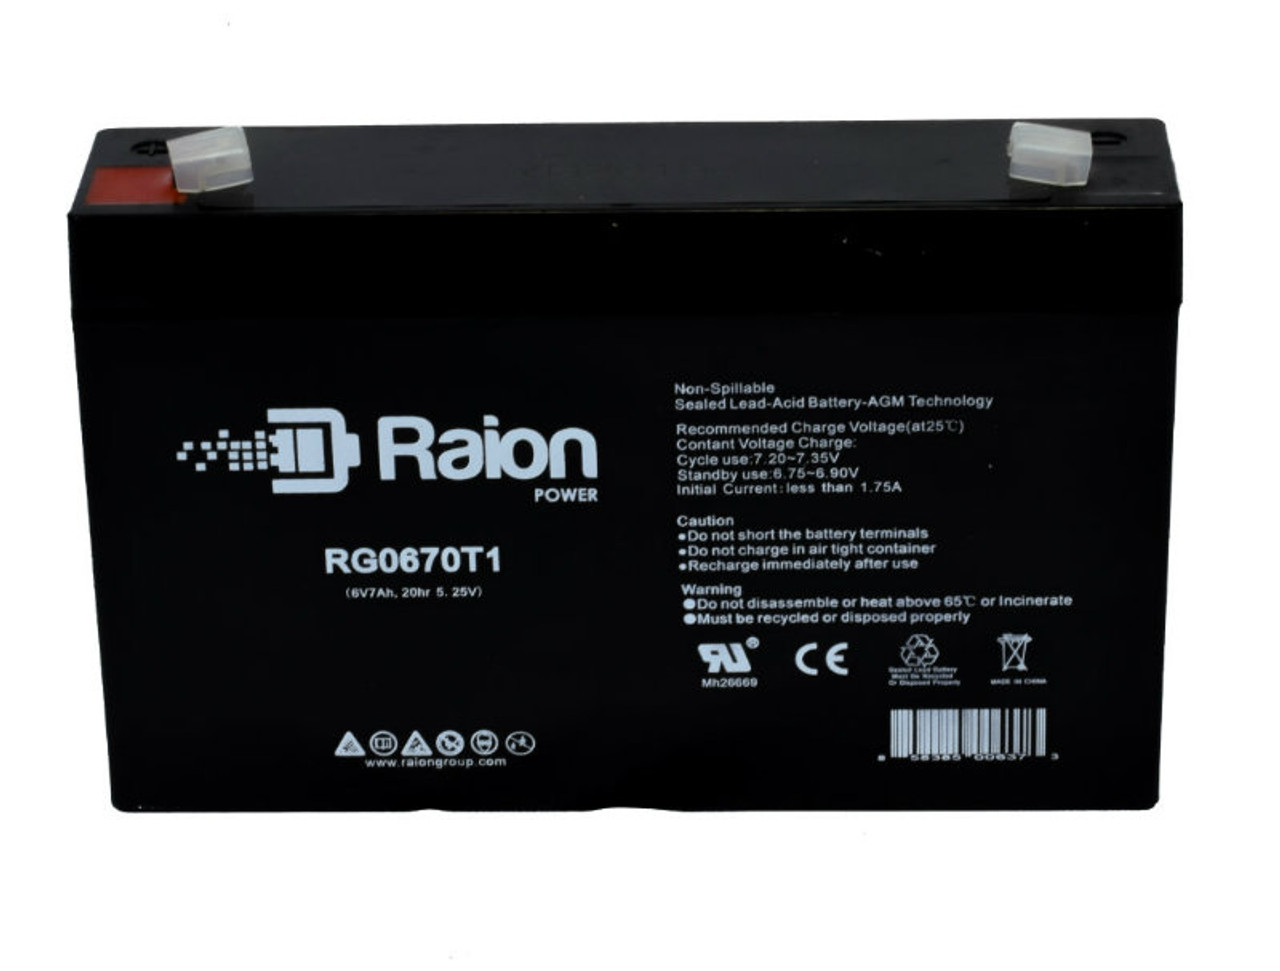 Raion Power RG0670T1 Replacement Battery Cartridge for Technacell EP666